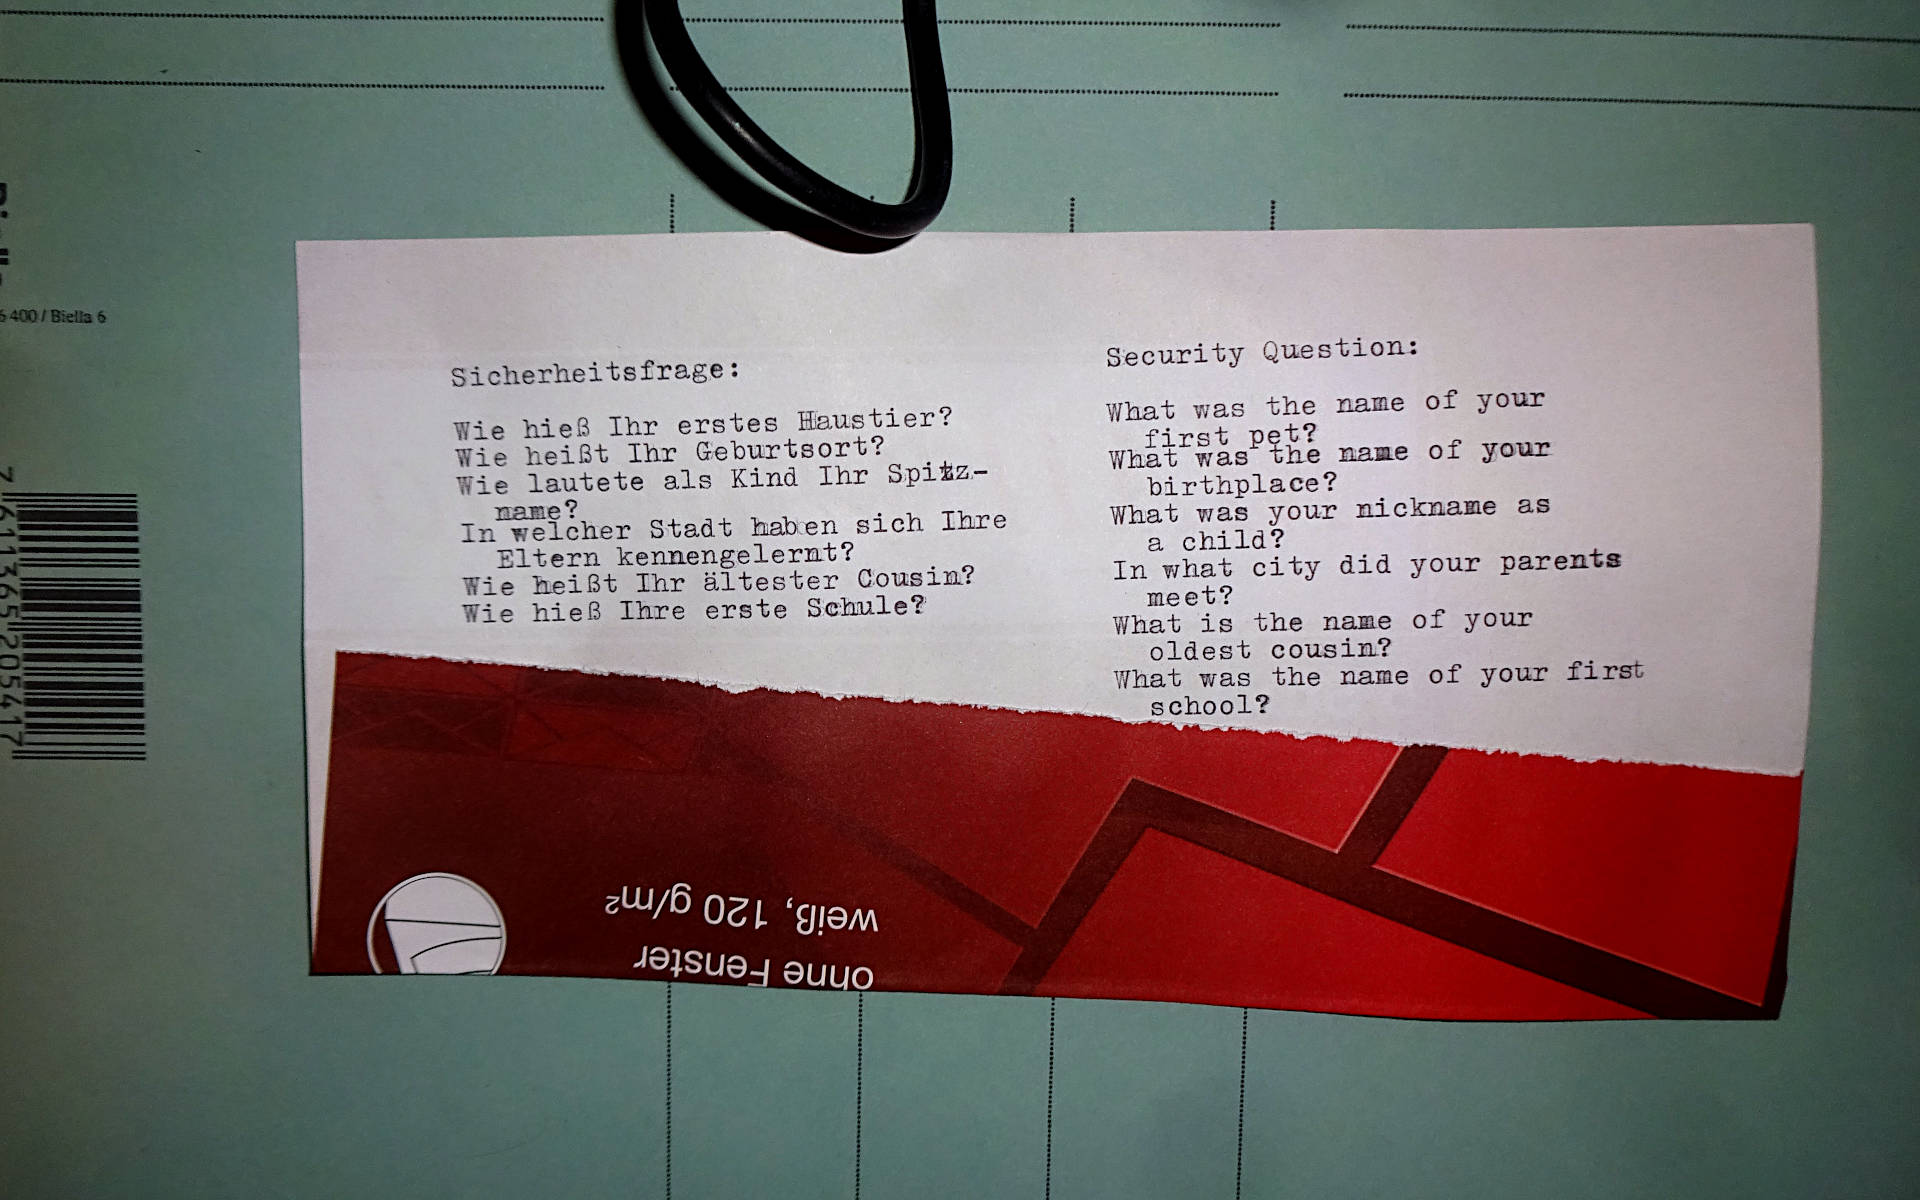 the poem is written with a typewriter on the back of an envelope advertisment in 2 columns, german and english